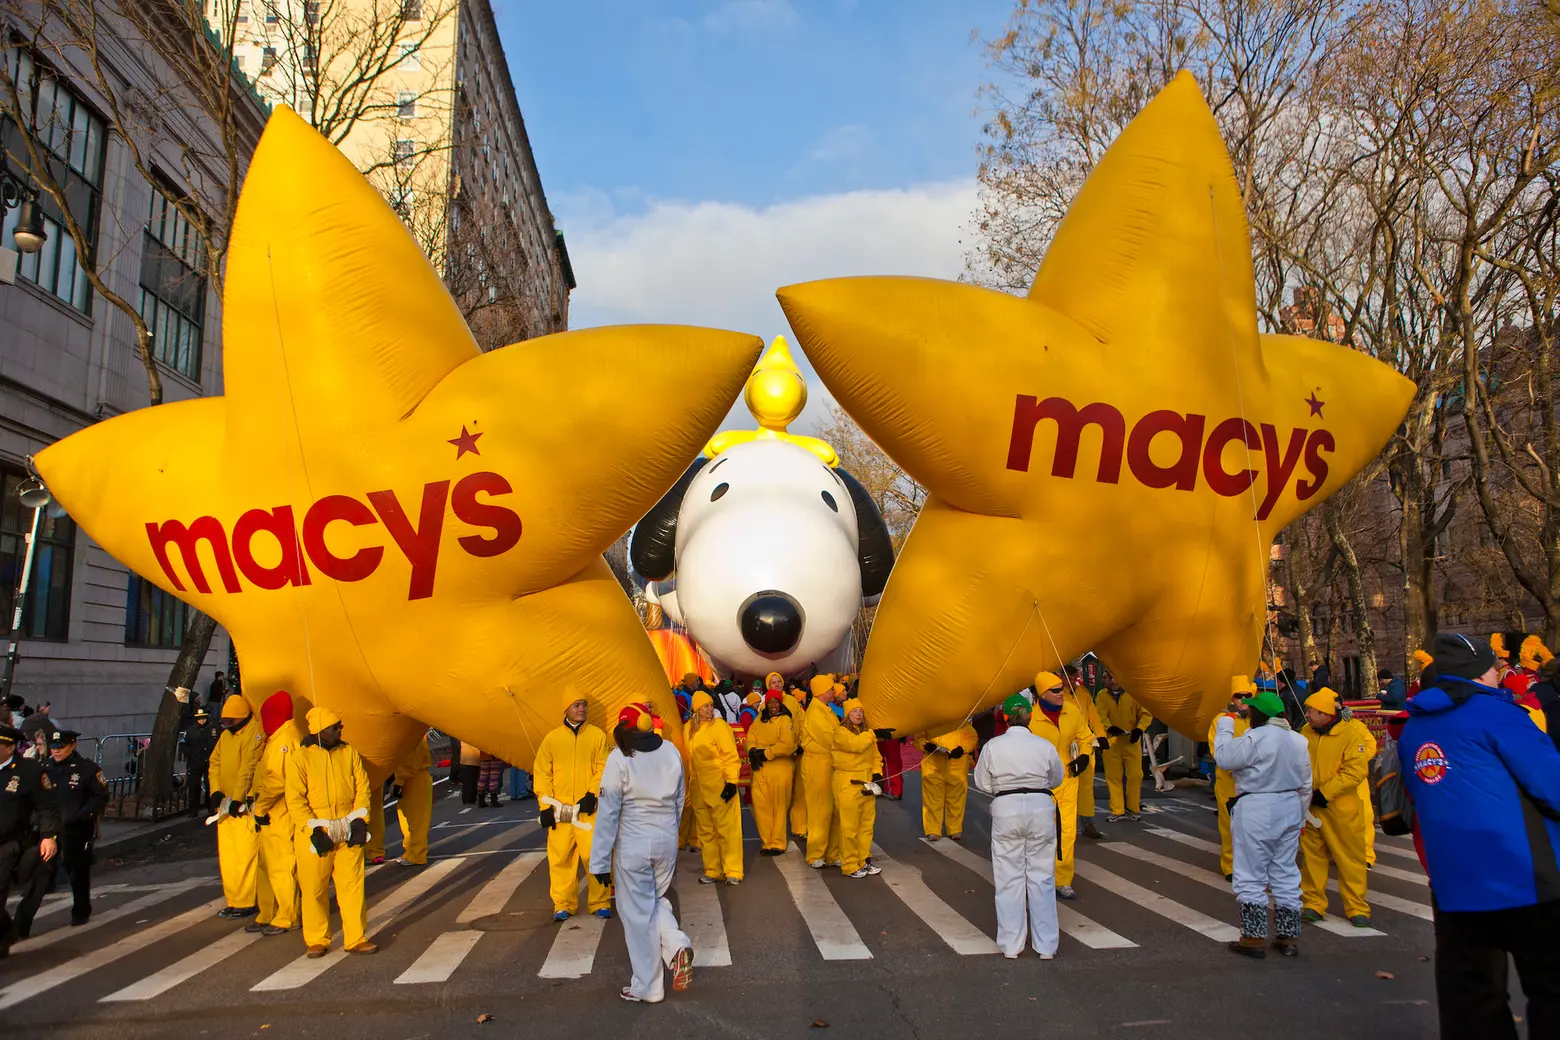 What you should know about the 2022 Macy’s Thanksgiving Day Parade